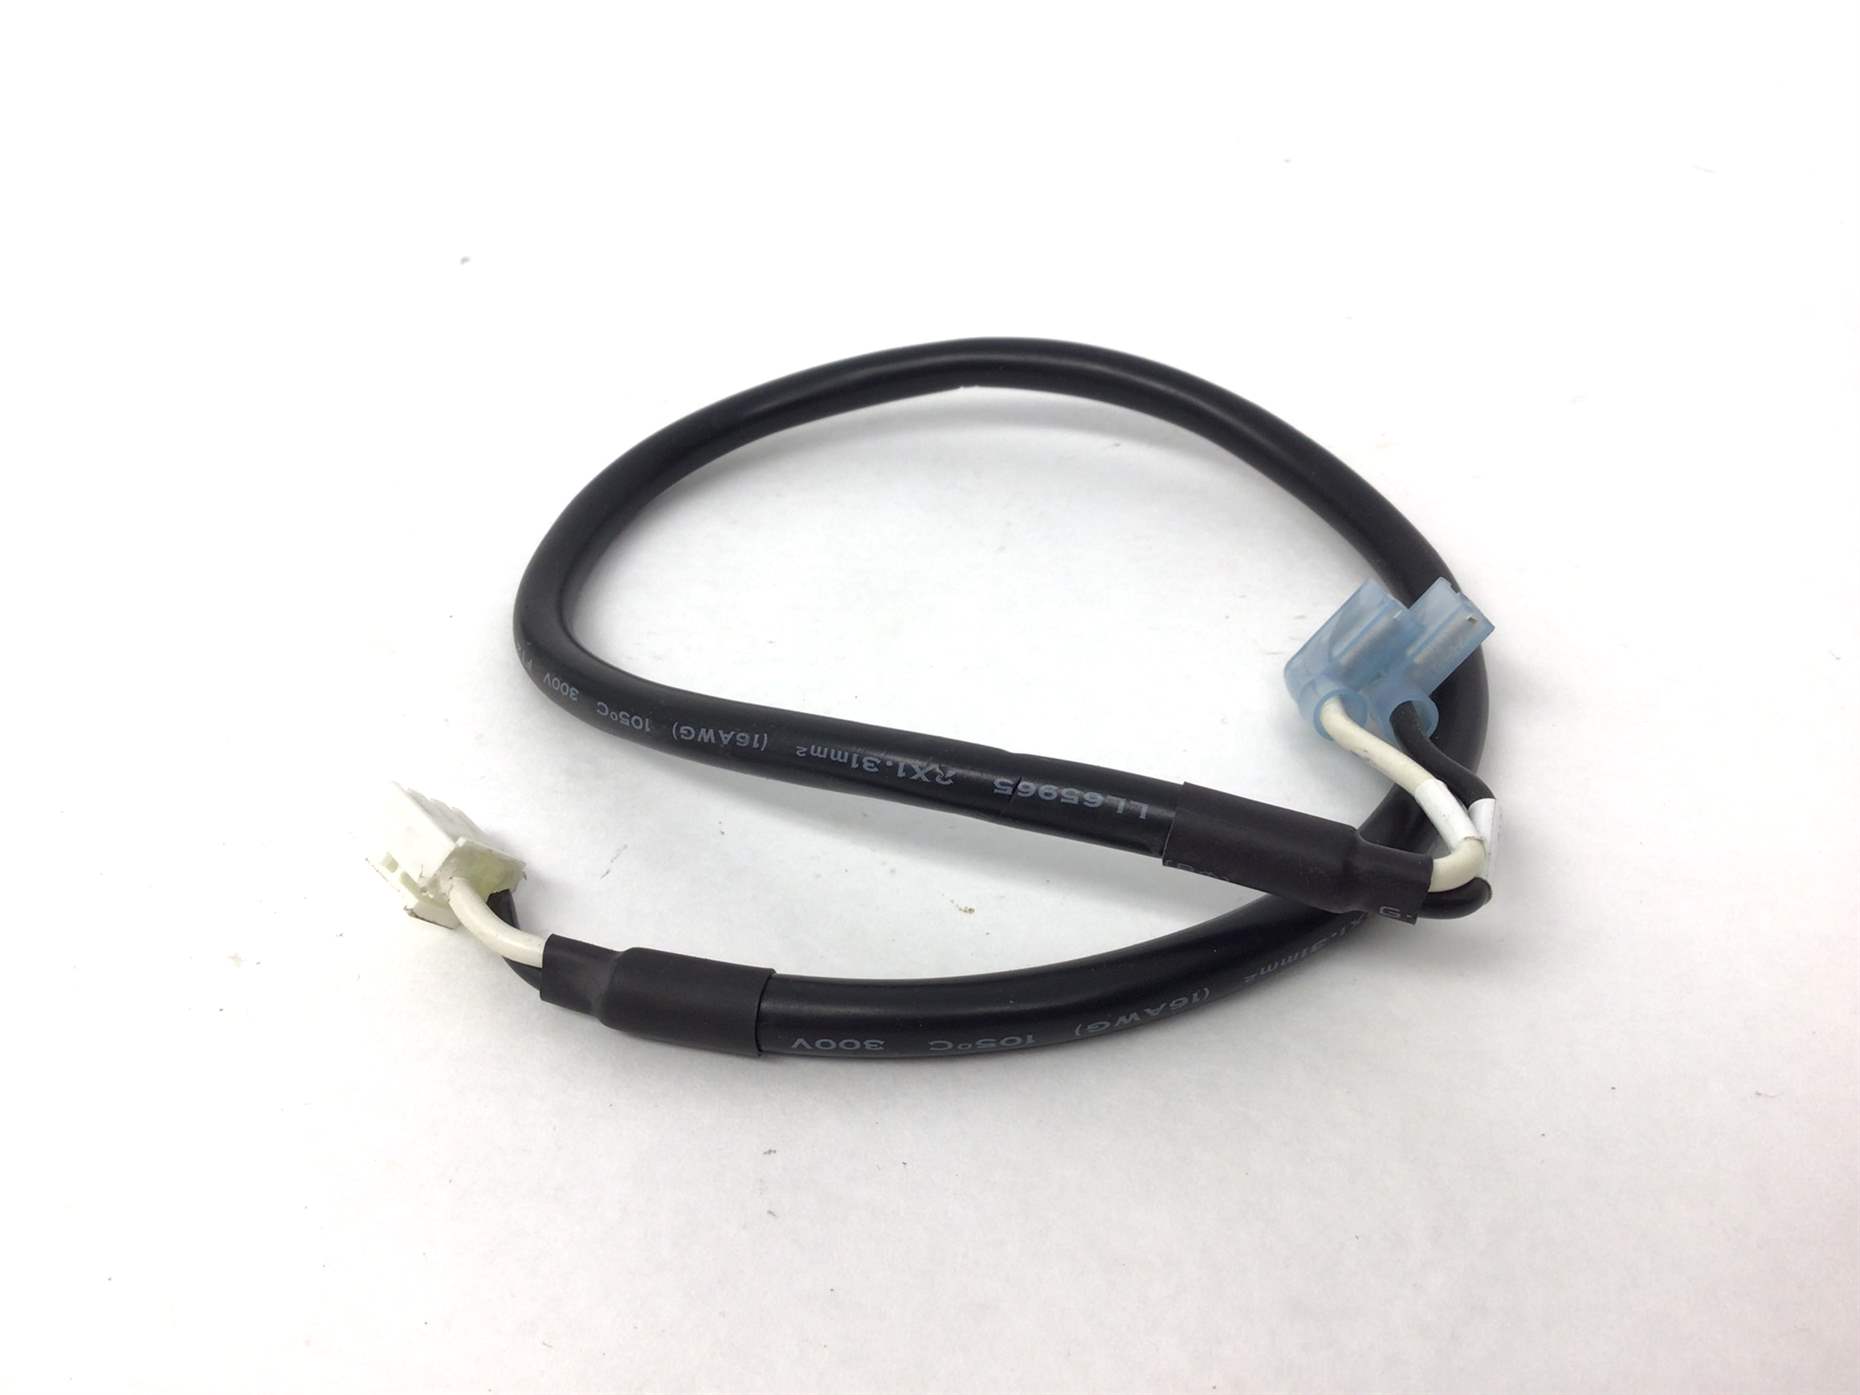 Matrix Fitness S5x-02 Stepper Internal Connector Wire Harness with Quick Connect